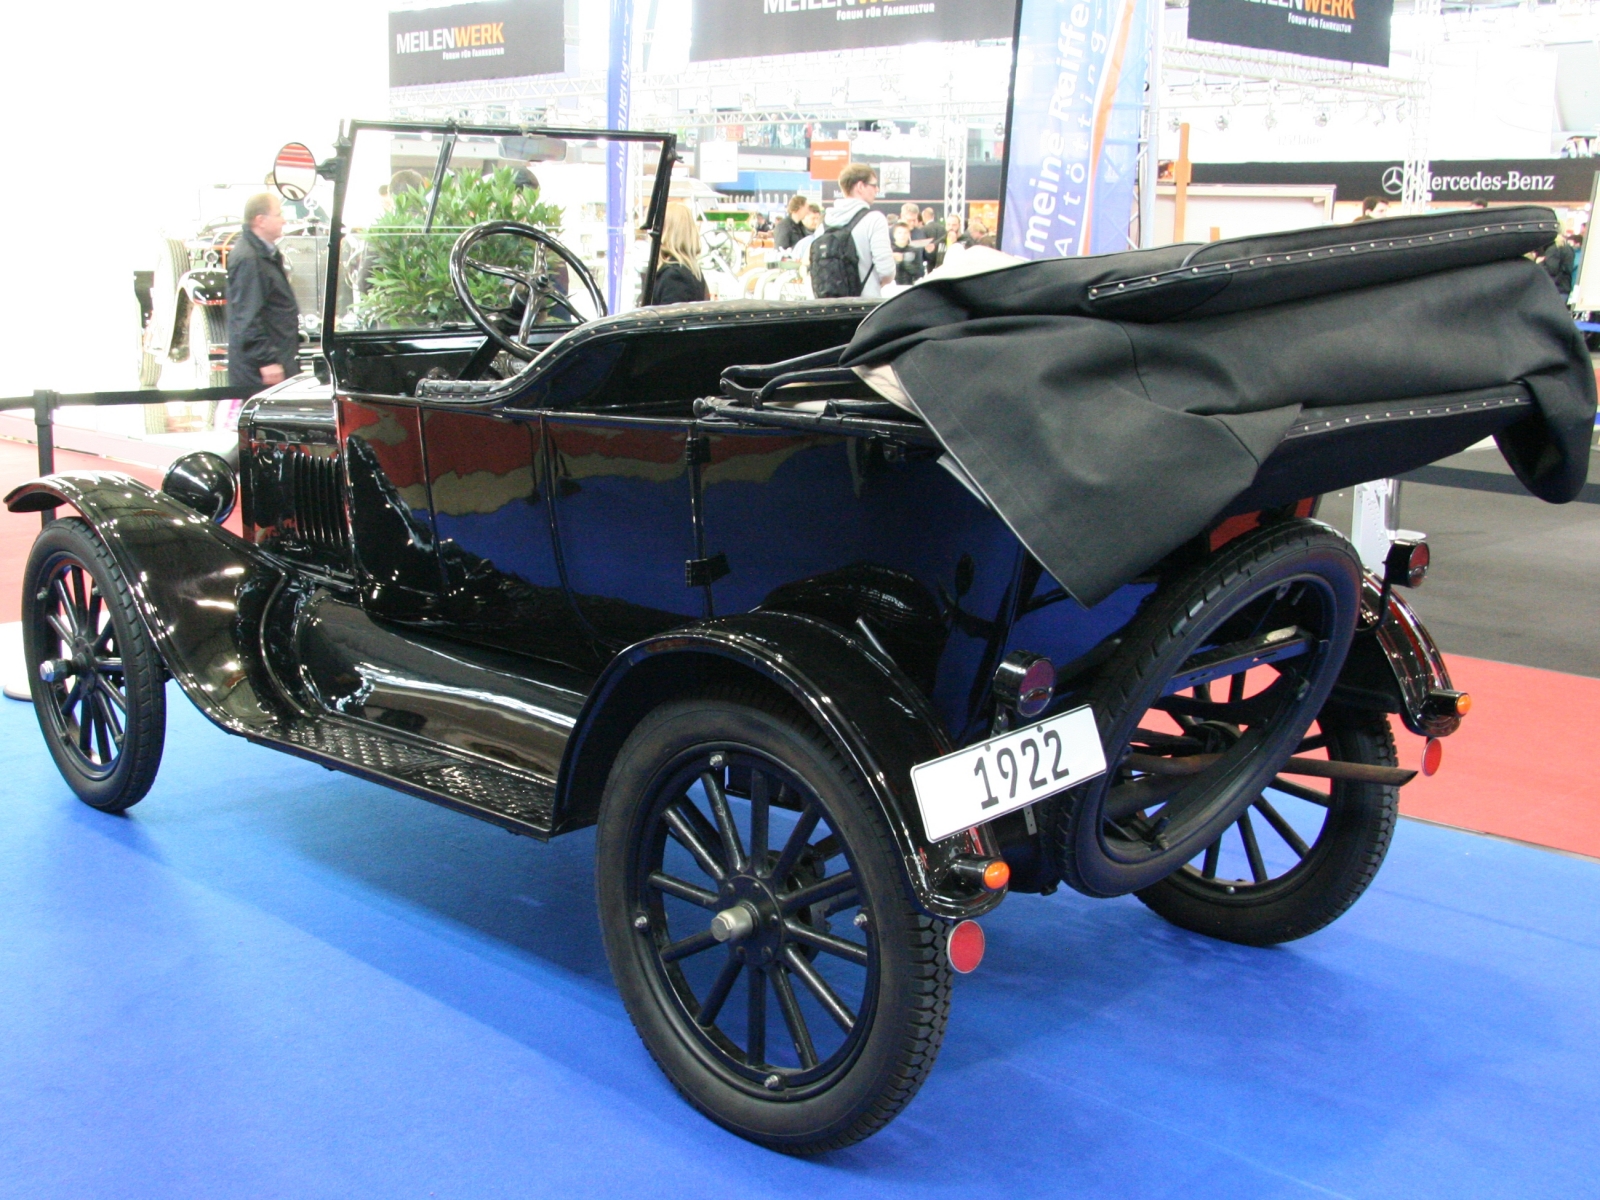 Ford Model T